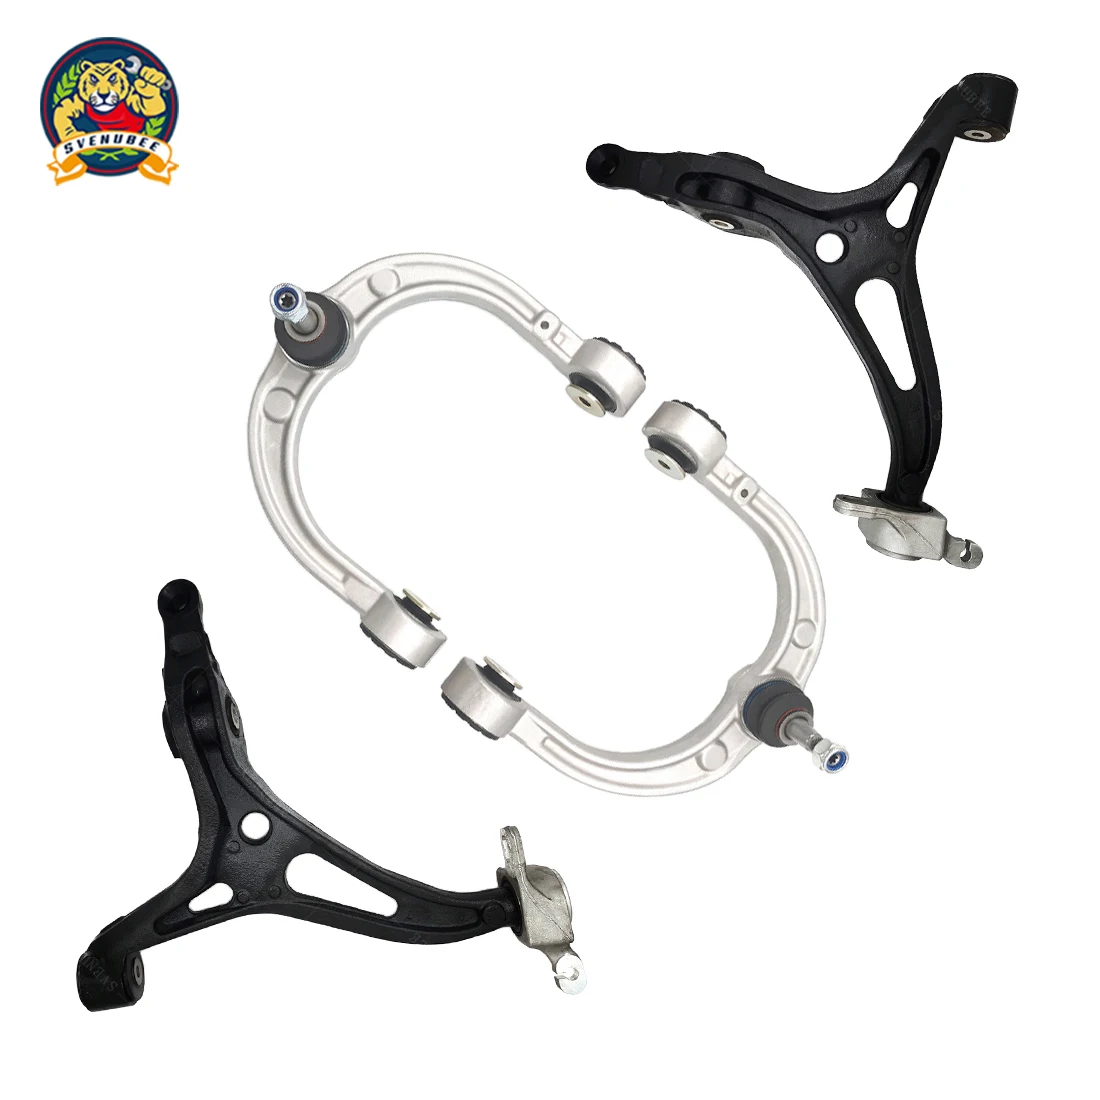 

Svenubee Front Lower Control Arms Suspension for Mercedes-Benz W164 GL550 ML350 ML450 ML500 ML550 2006 2007 2008 - 2012